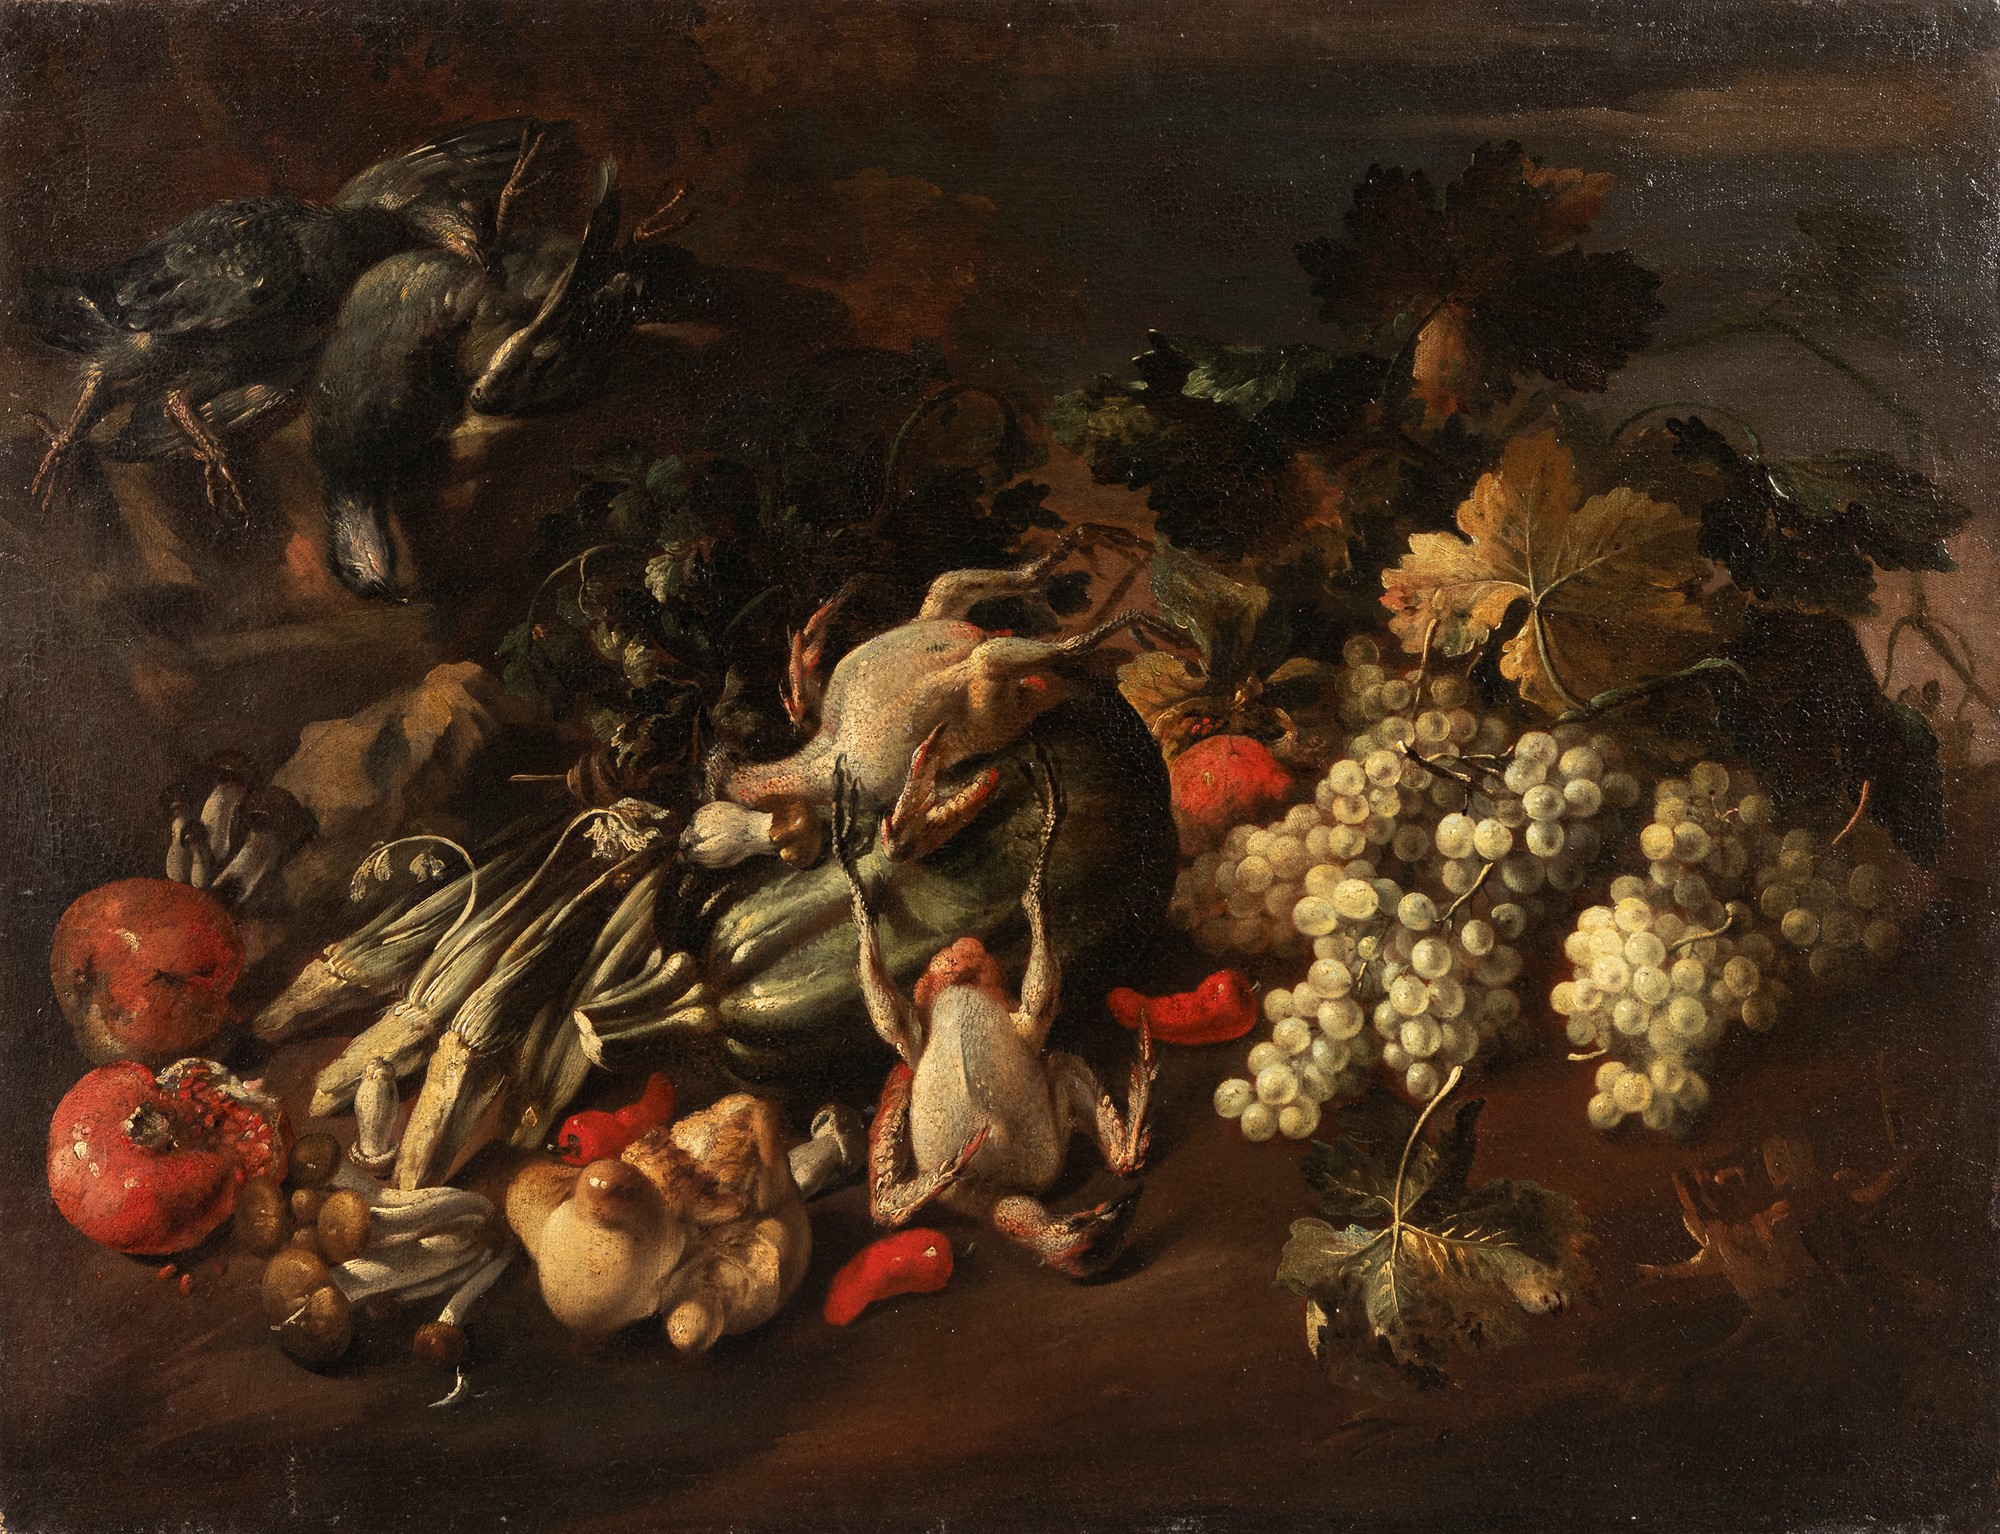 Felice Boselli (Piacenza 1650-Parma 1732) - Game, fruits and vegetables